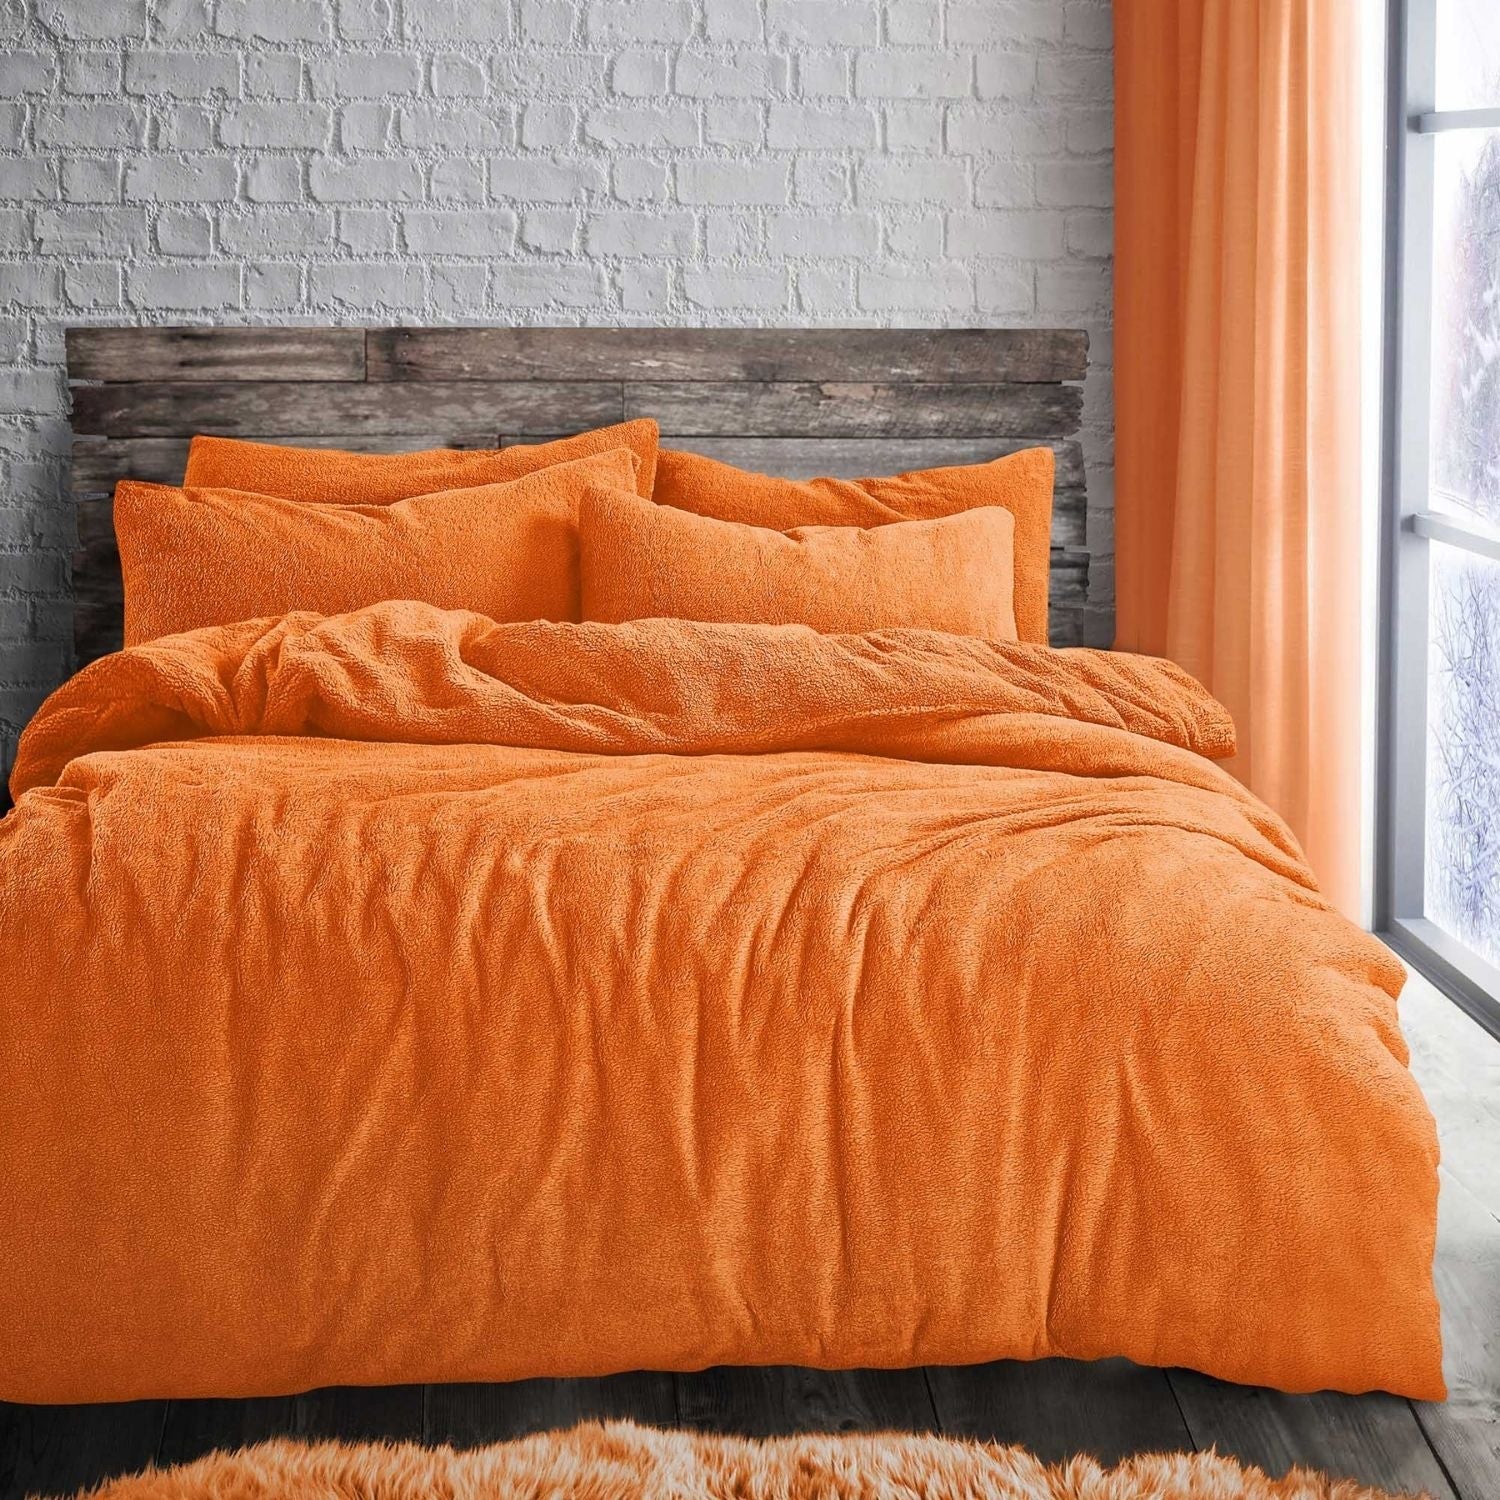  The Home Bedroom Teddy Supersoft Duvet Cover Set - Orange 1 Shaws Department Stores